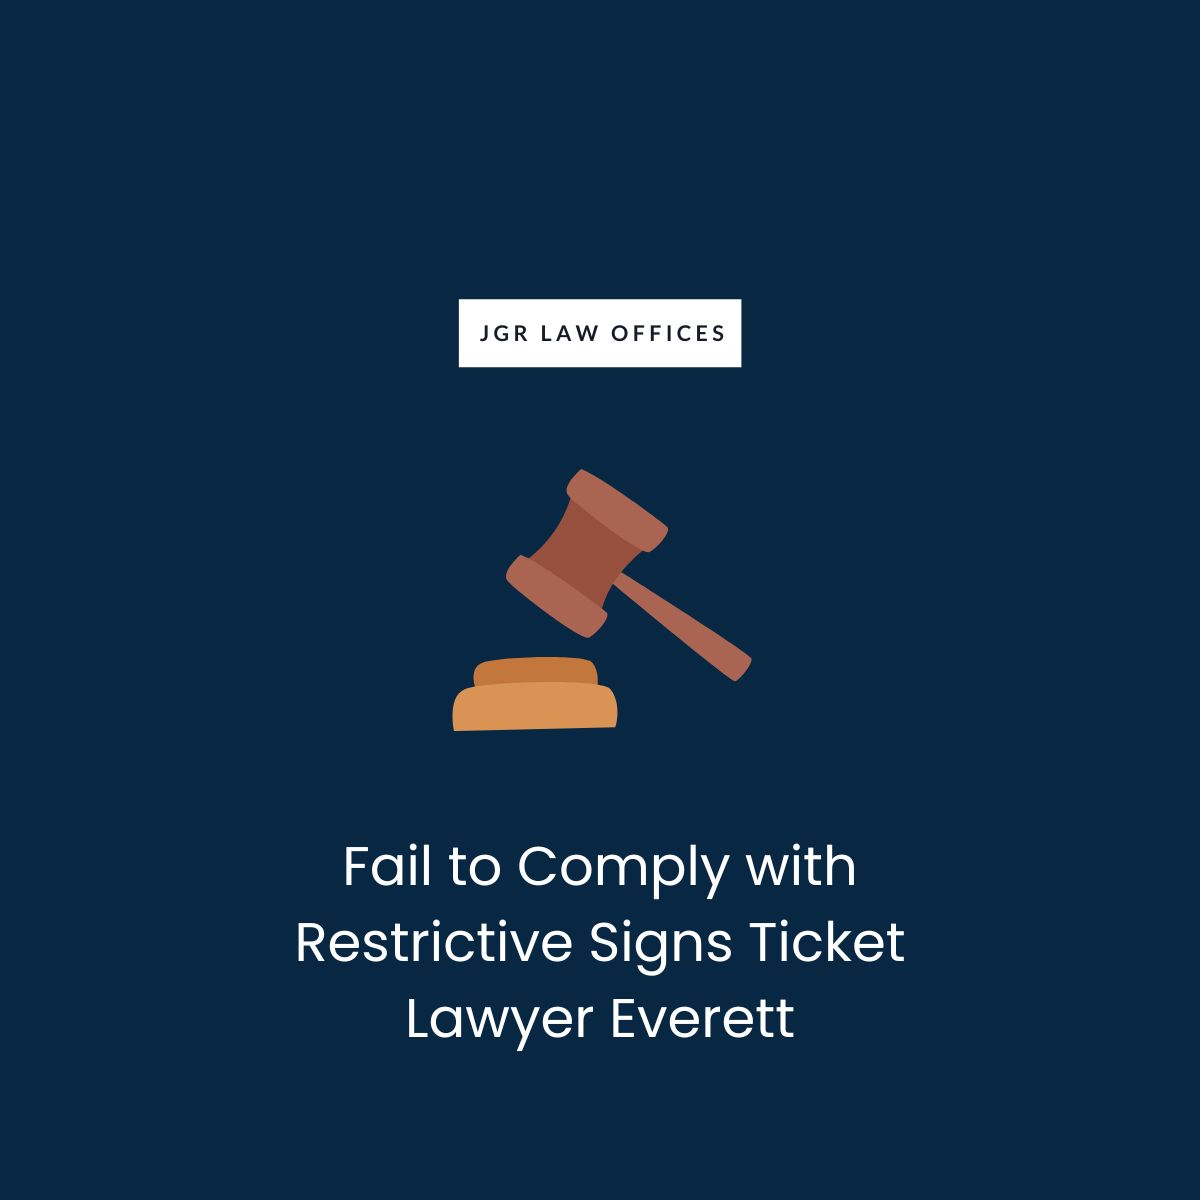 Fail to Comply with Restrictive Signs Ticket Attorney Everett